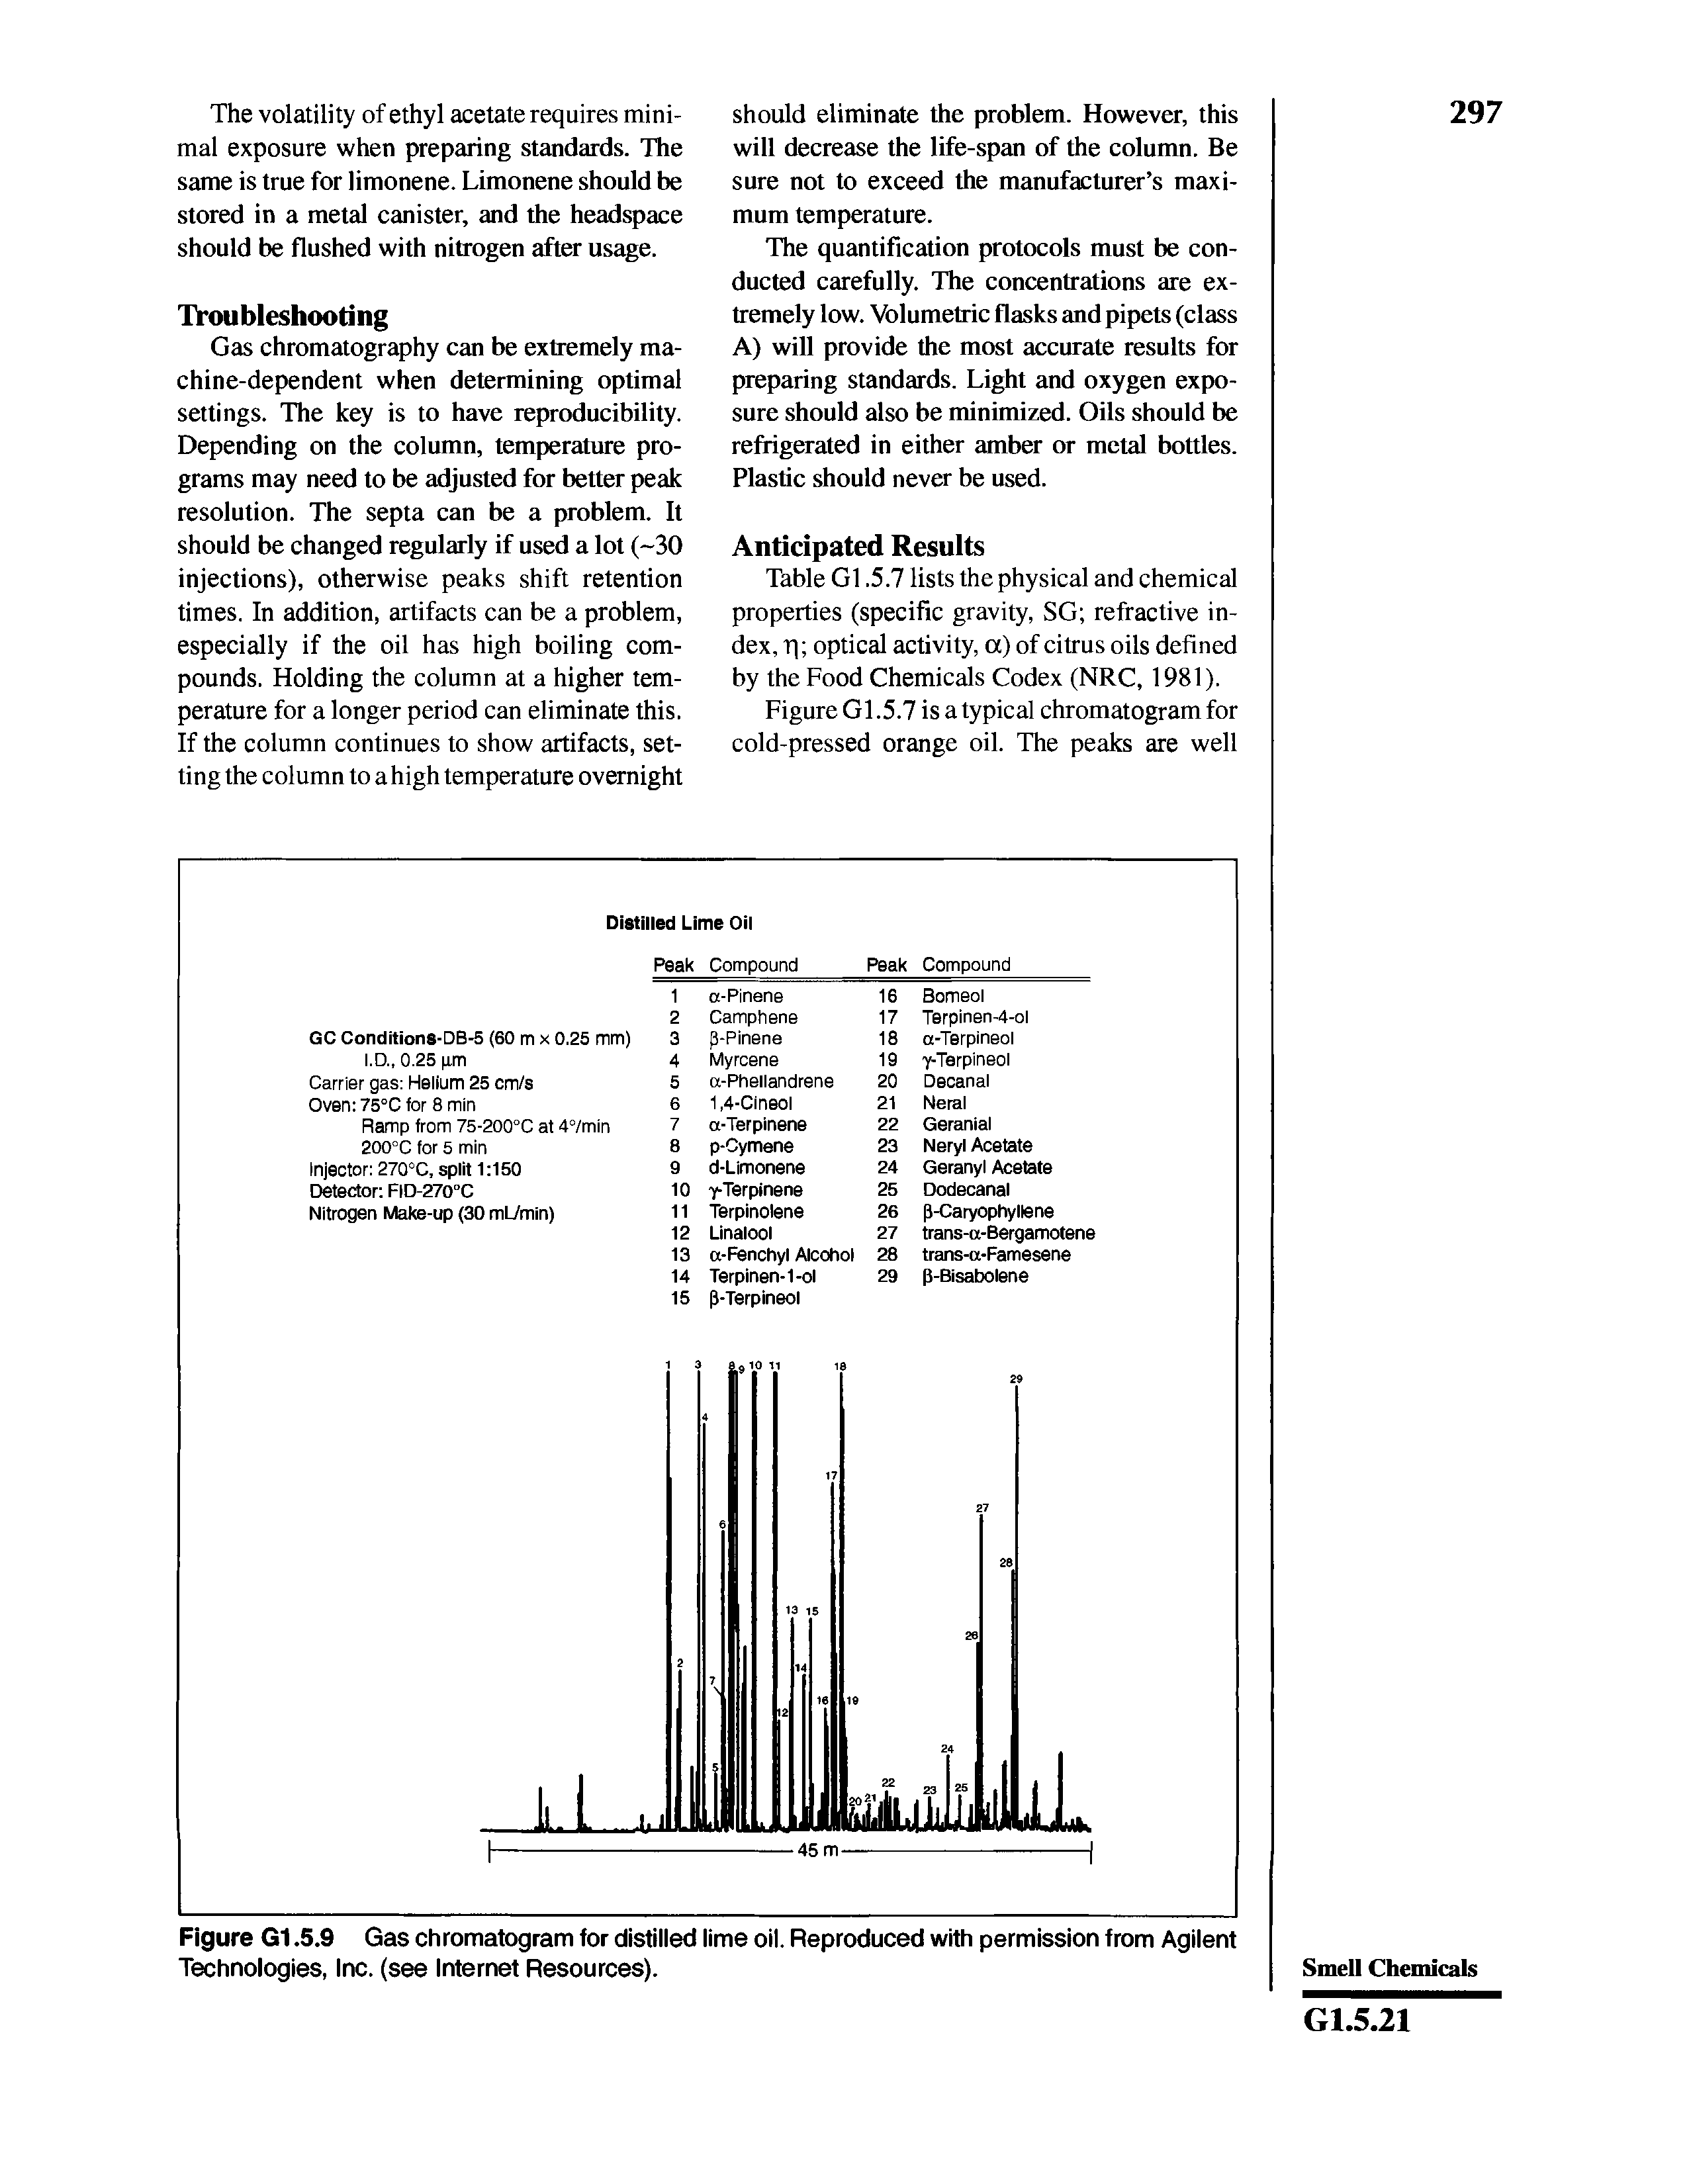 Figure G1.5.9 Gas chromatogram for distilled lime oil. Reproduced with permission from Agilent Technologies, Inc. (see Internet Resources).